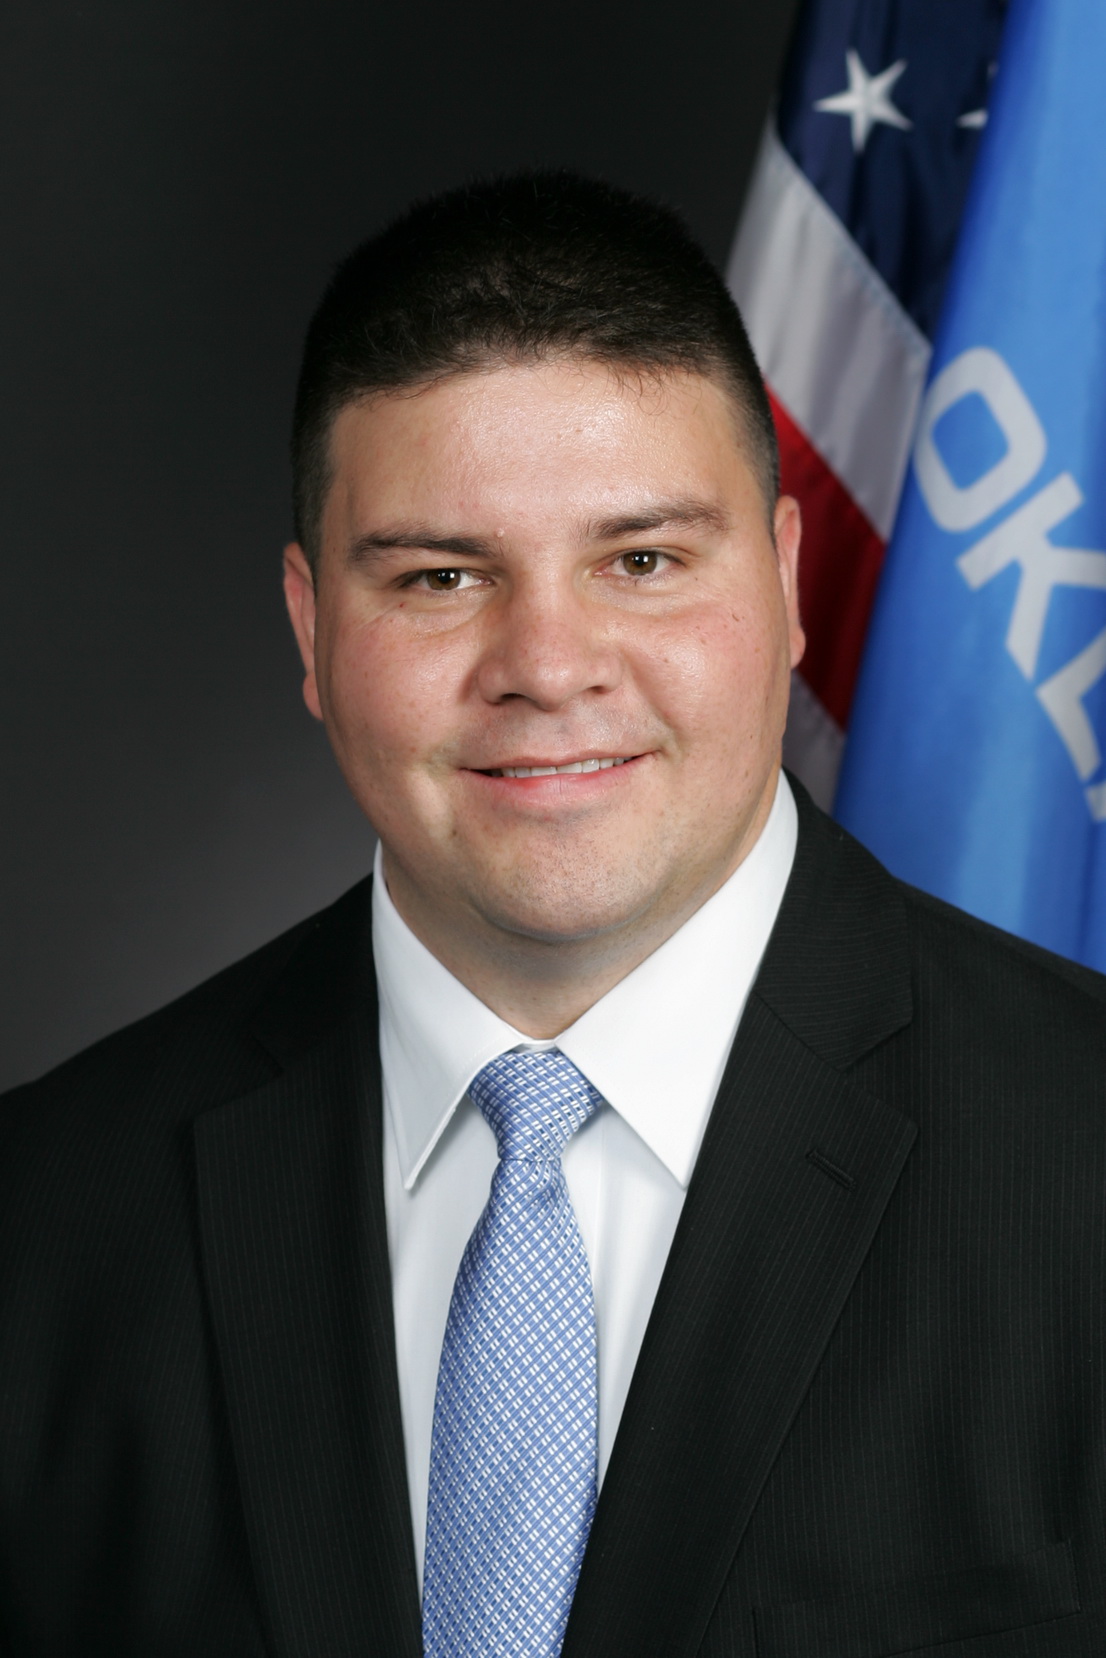 Who Is Ex-Politician Ralph Shortey Partner? All You Need To Know!